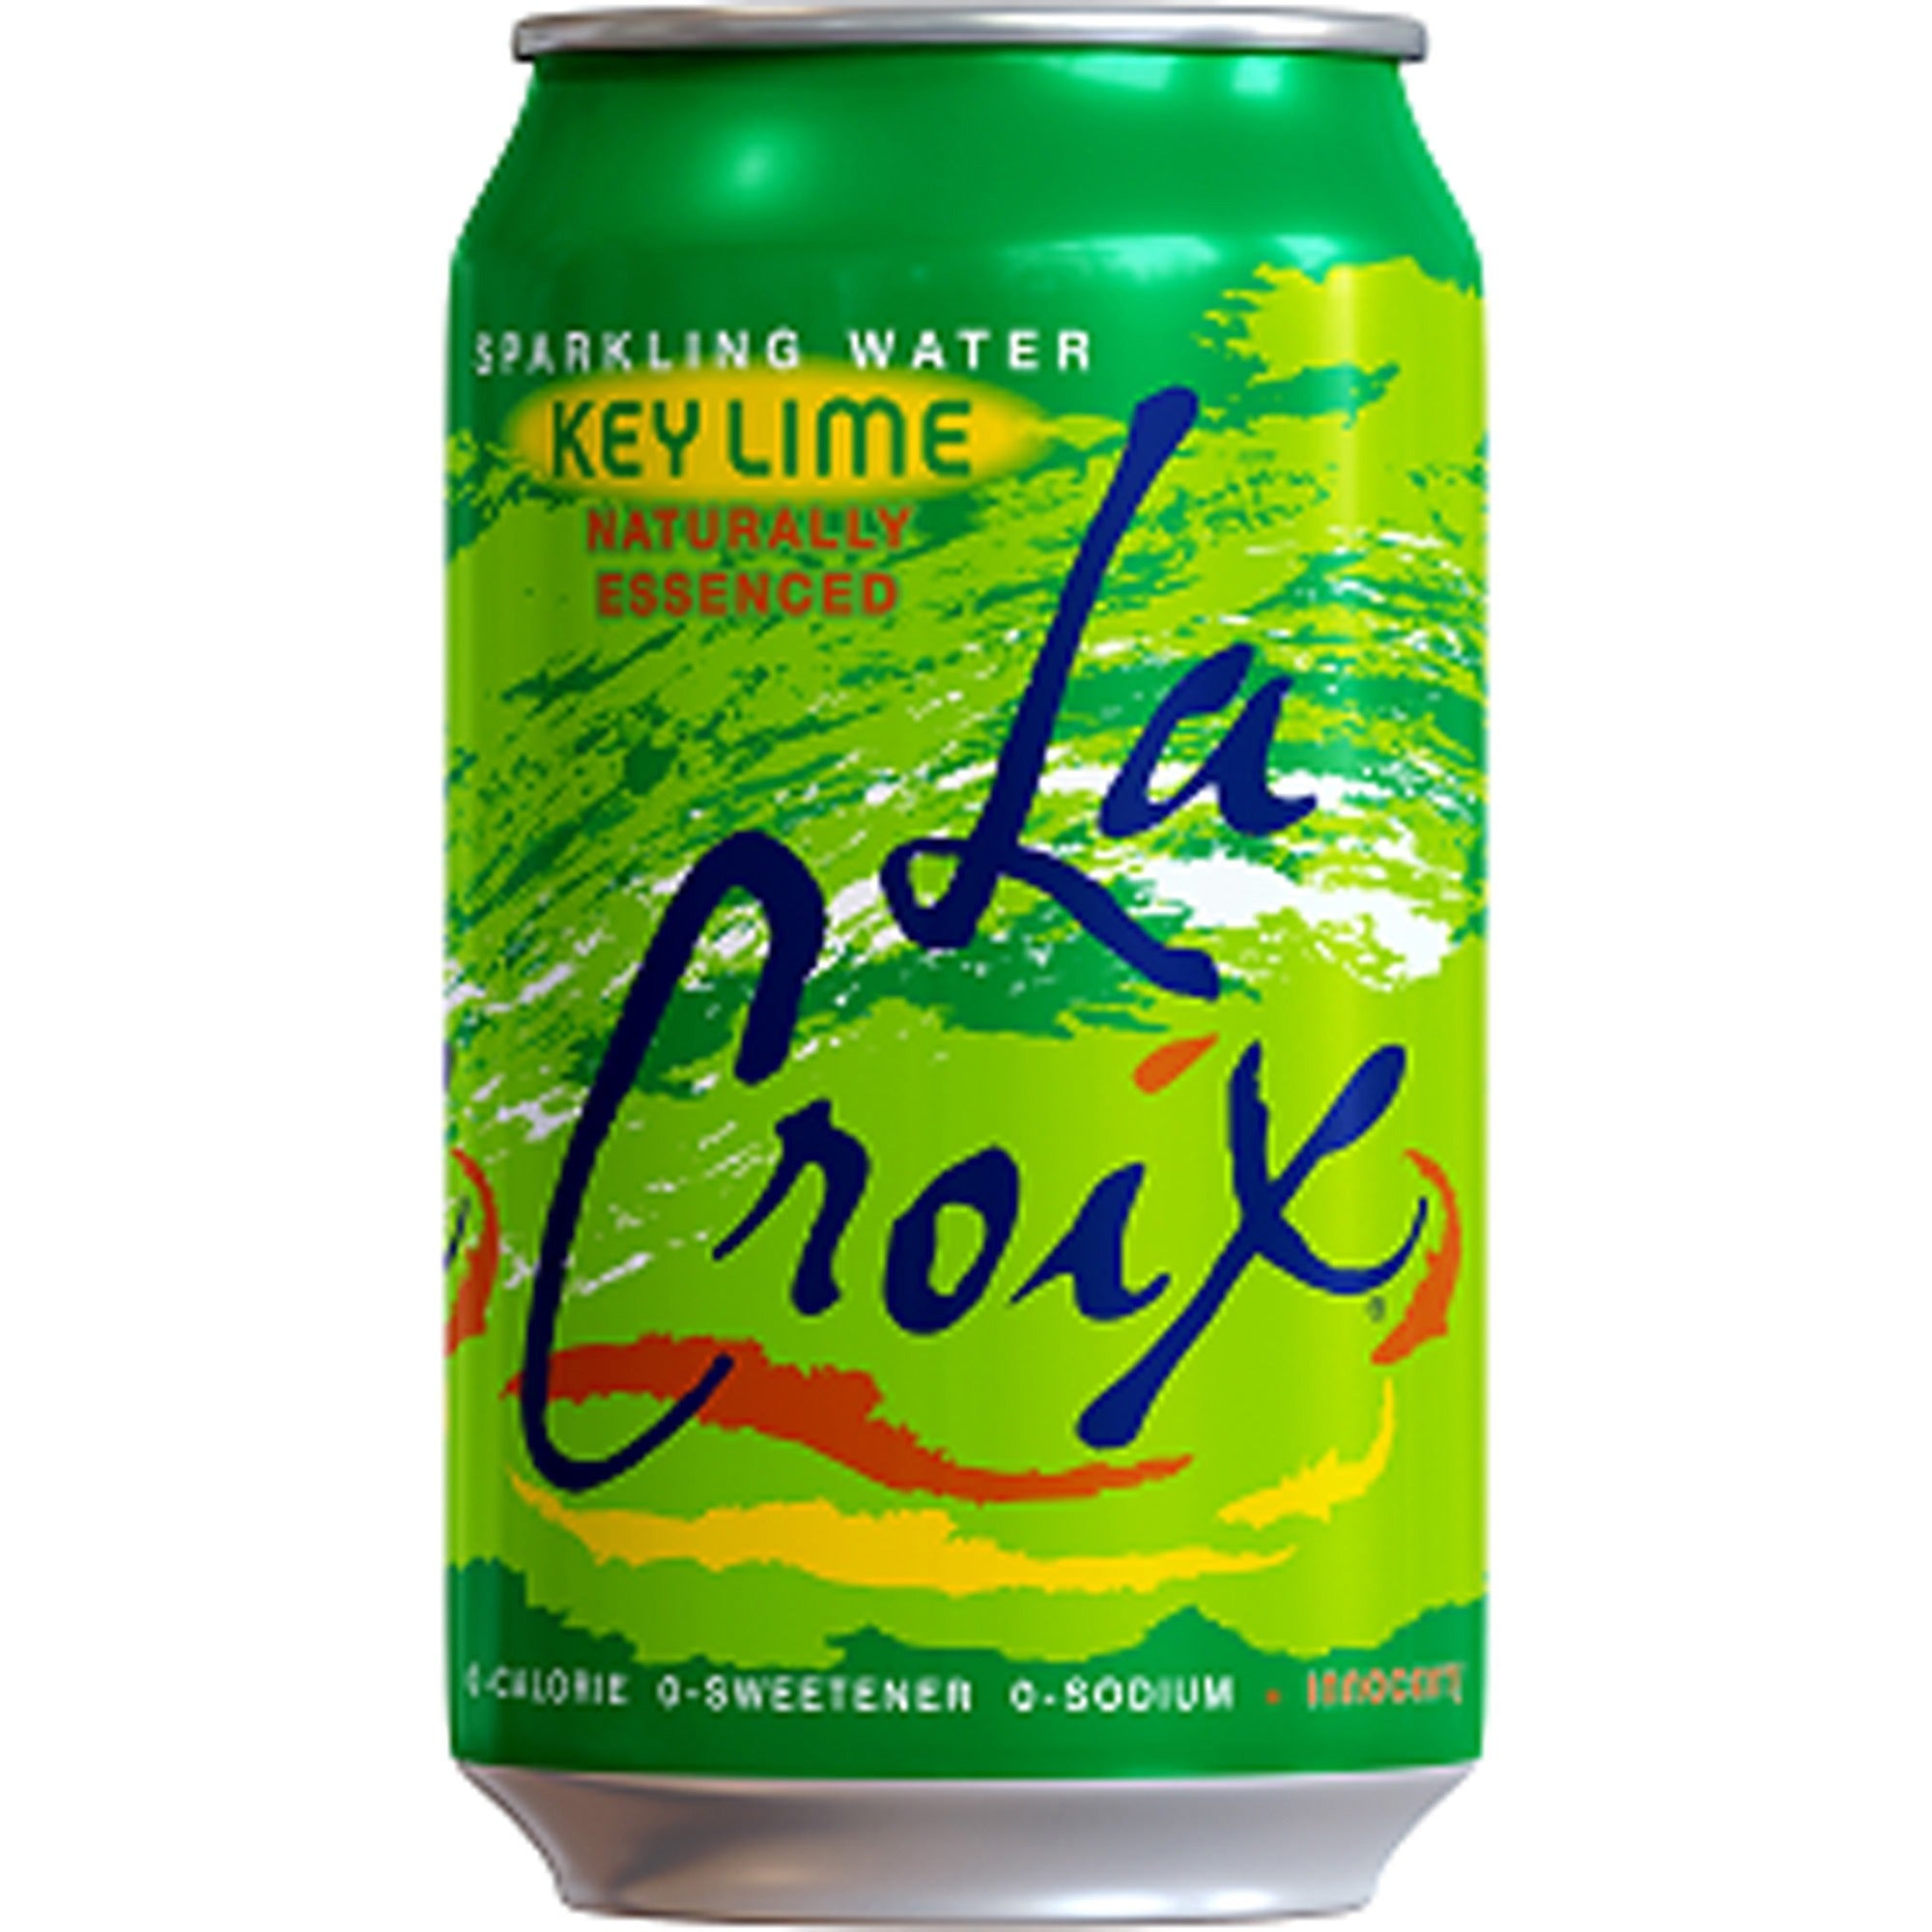 lacroix-key-lime-flavored-sparkling-water-ready-to-drink-12-fl-oz-355-ml-2-carton-can_lcx40108 - 1